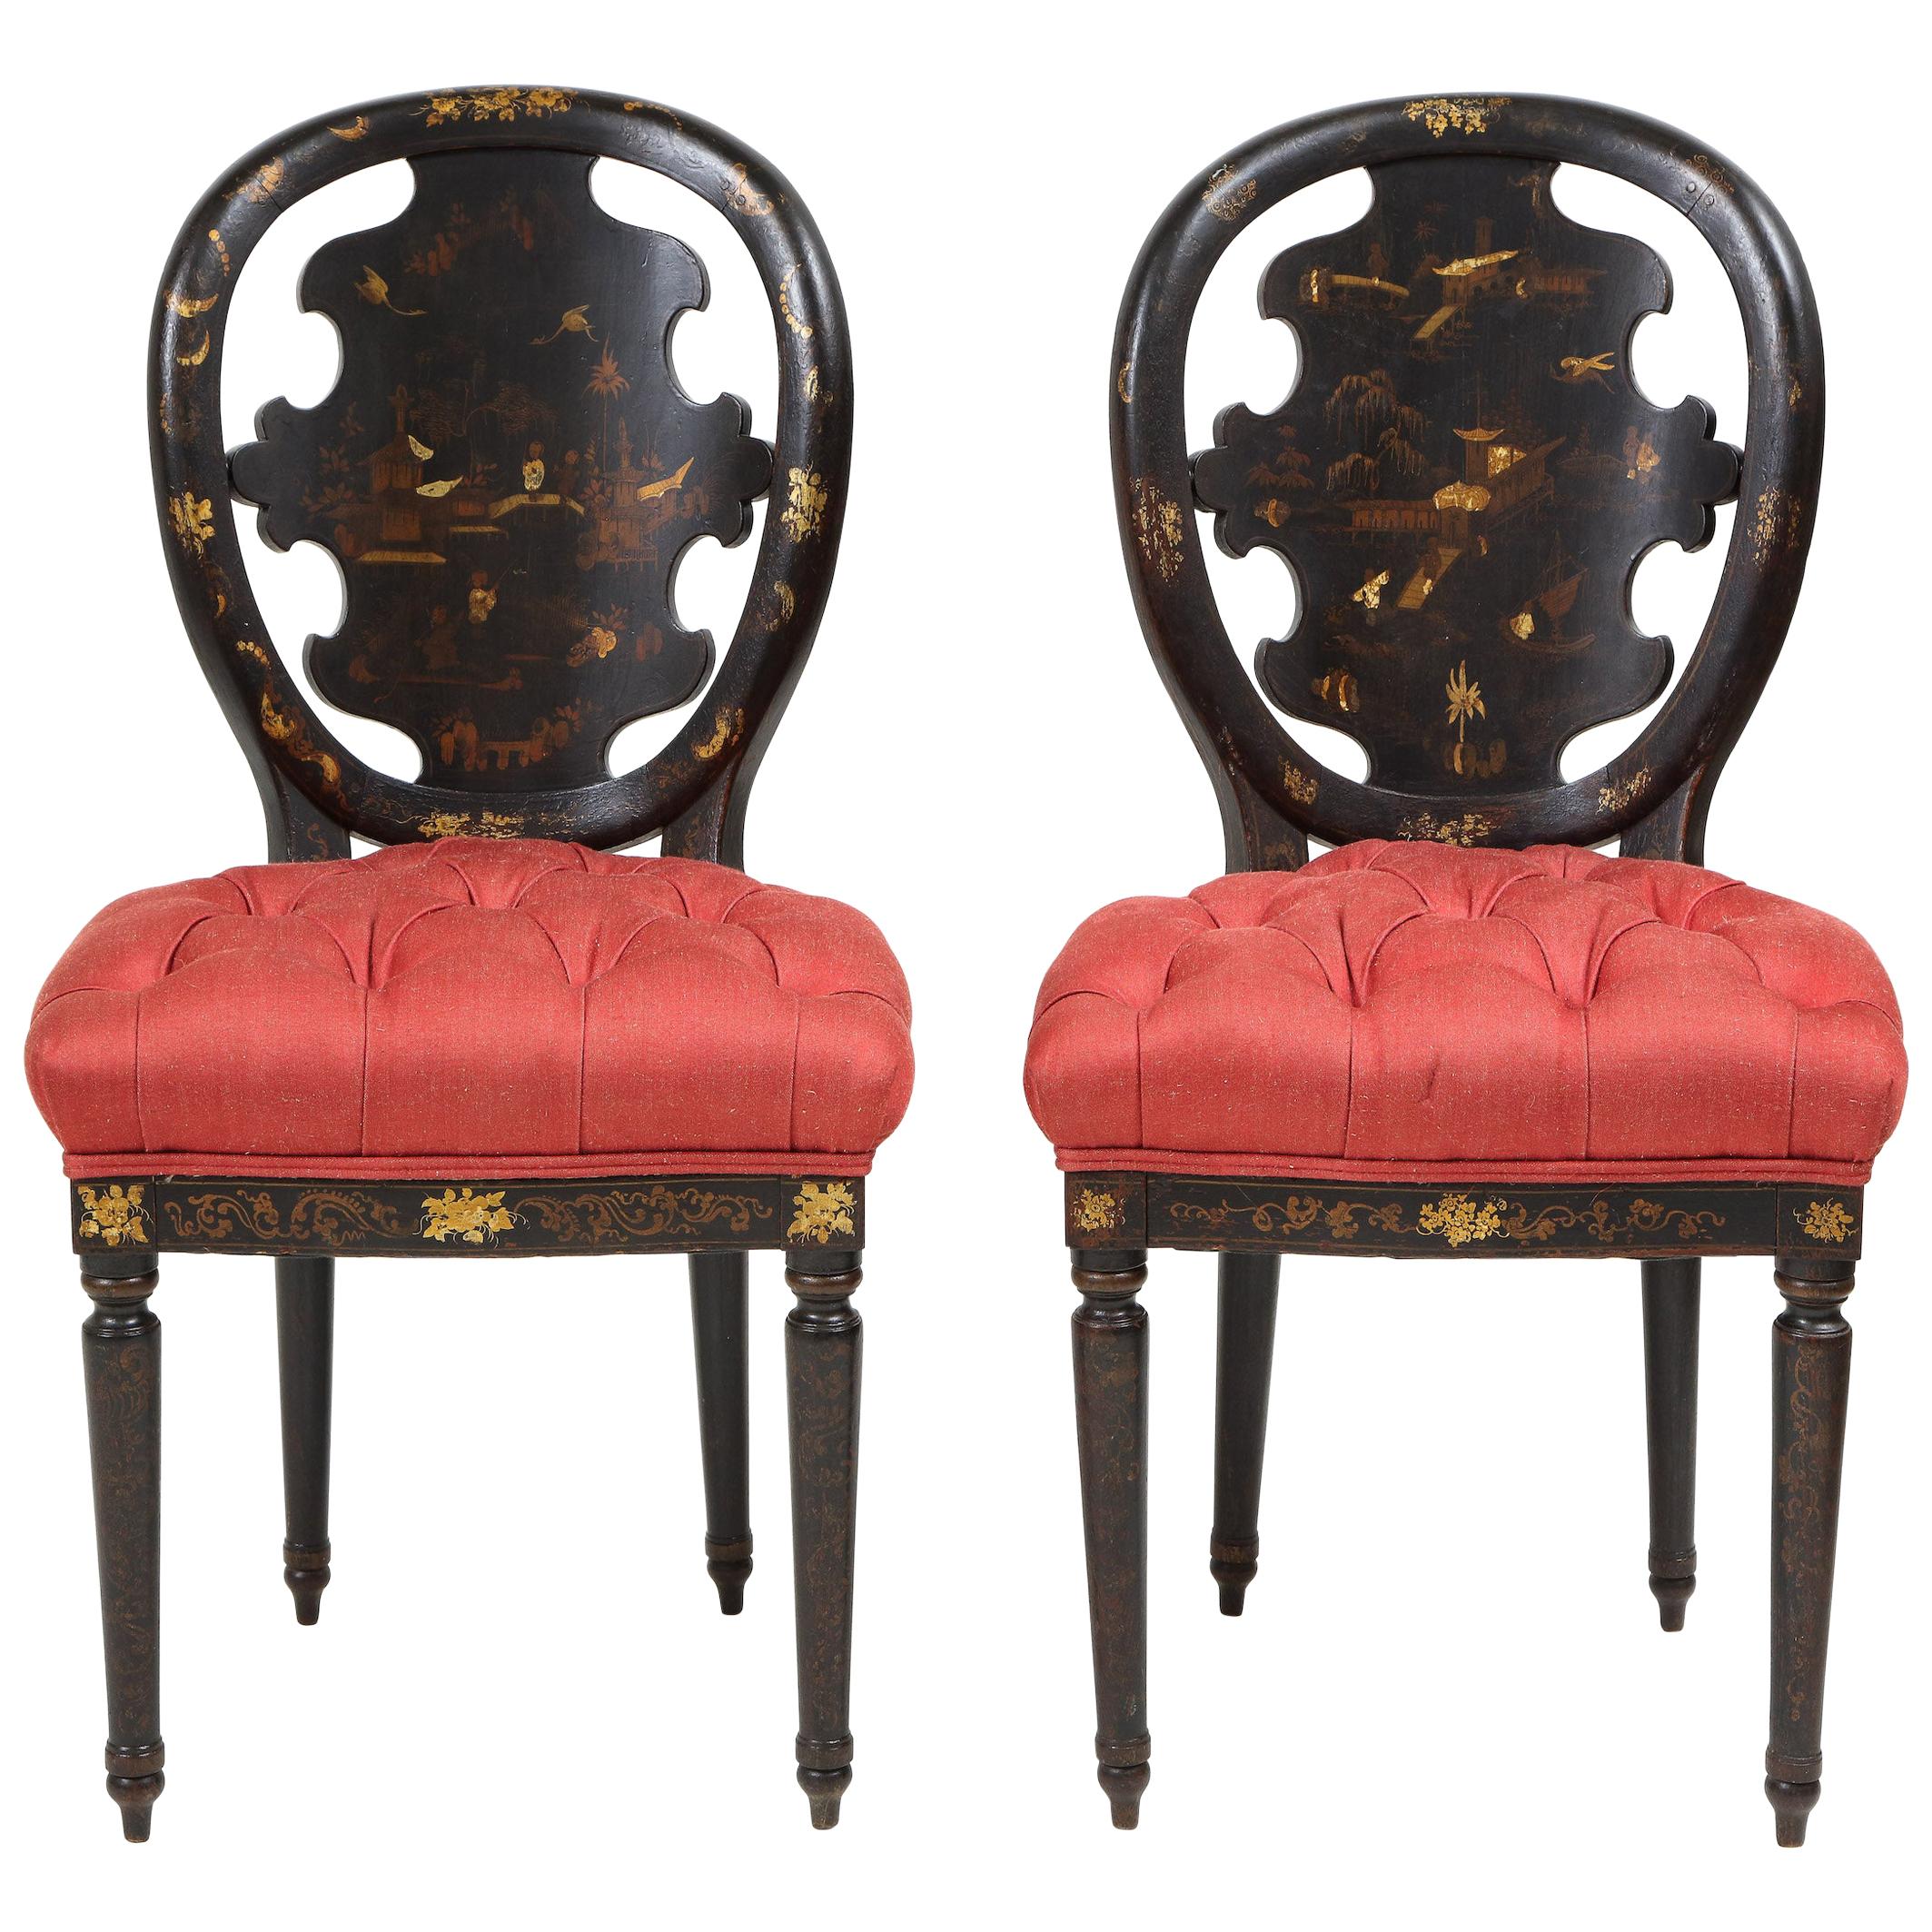 Pair of Victorian Black Japanned and Gilt Side Chairs